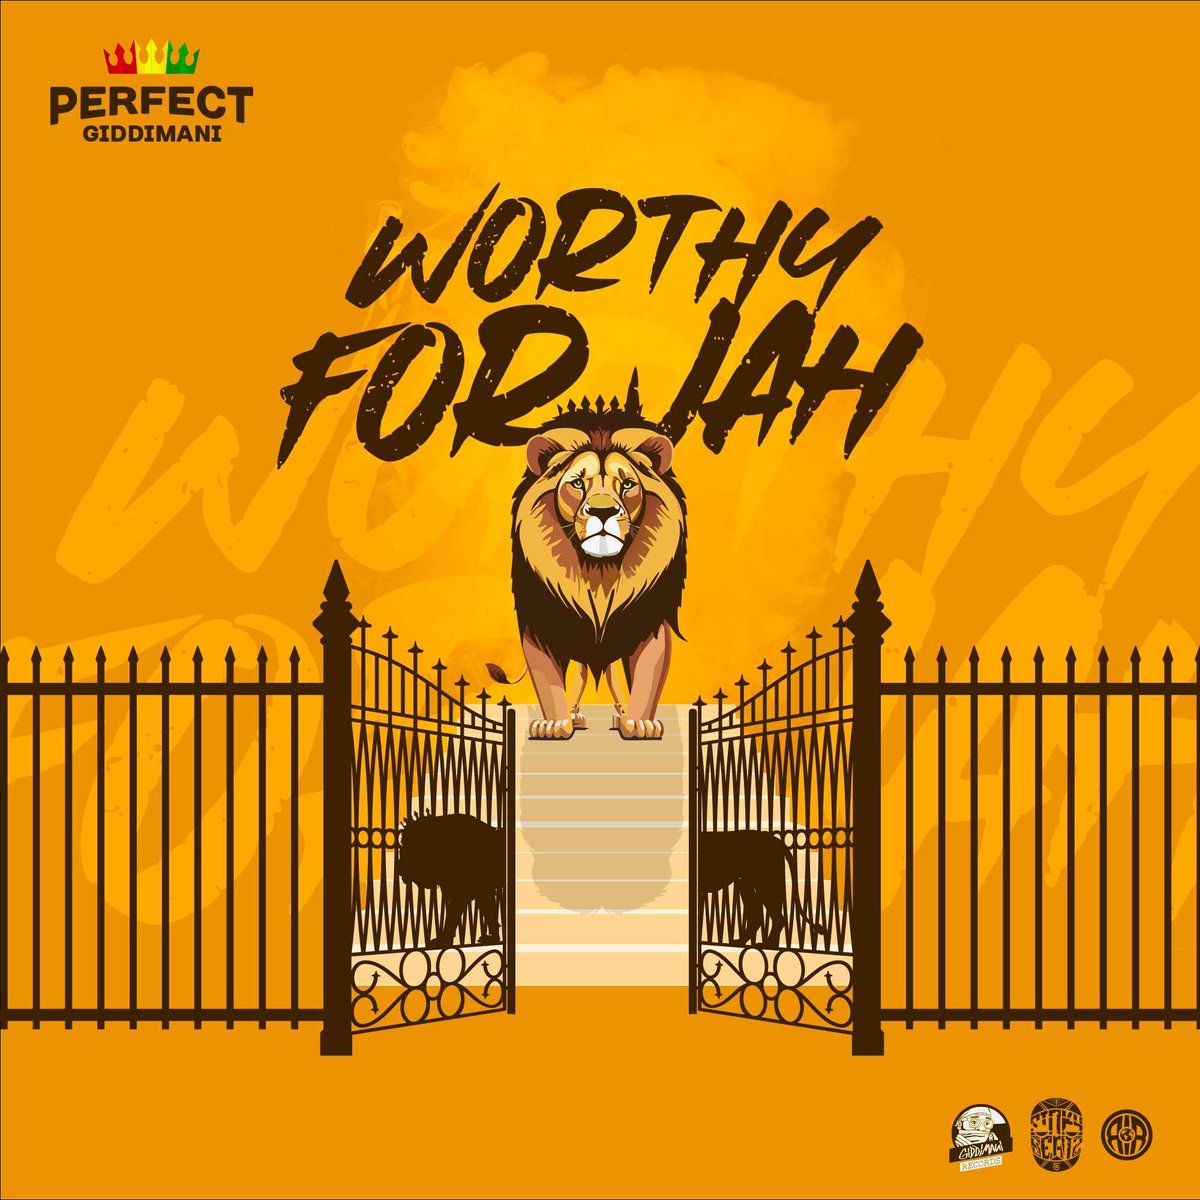 'Worthy For Jah'💯🙏👊🏿
NEW UPCOMING RELEASE!!
MAY 3RD AVAILABLE ON ALL MAJORS!
#PerfectGiddimani &  #SinkyBeatz